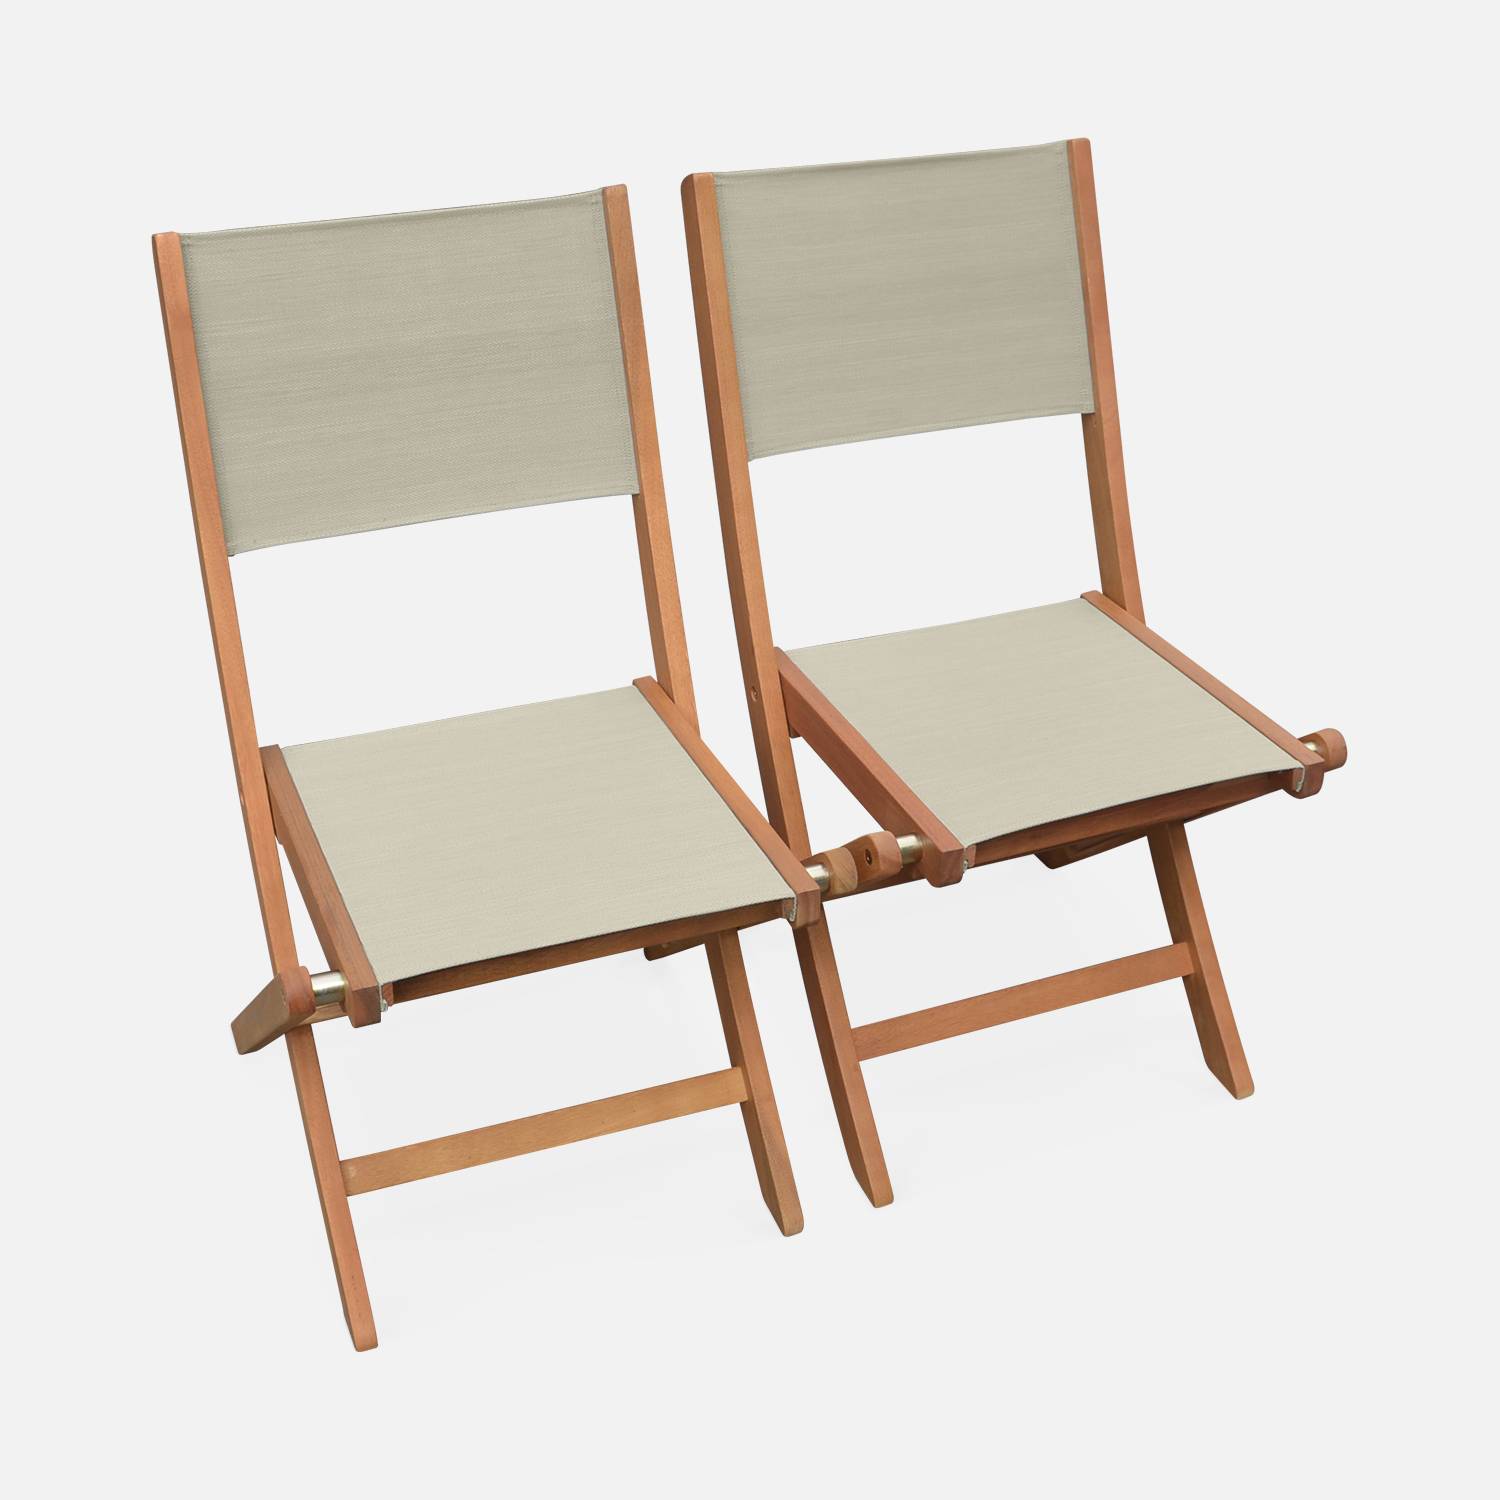 Set of 2 garden chairs in wood,  oiled FSC eucalyptus and textilene folding chairs - Almeria -  Grey taupe Photo3